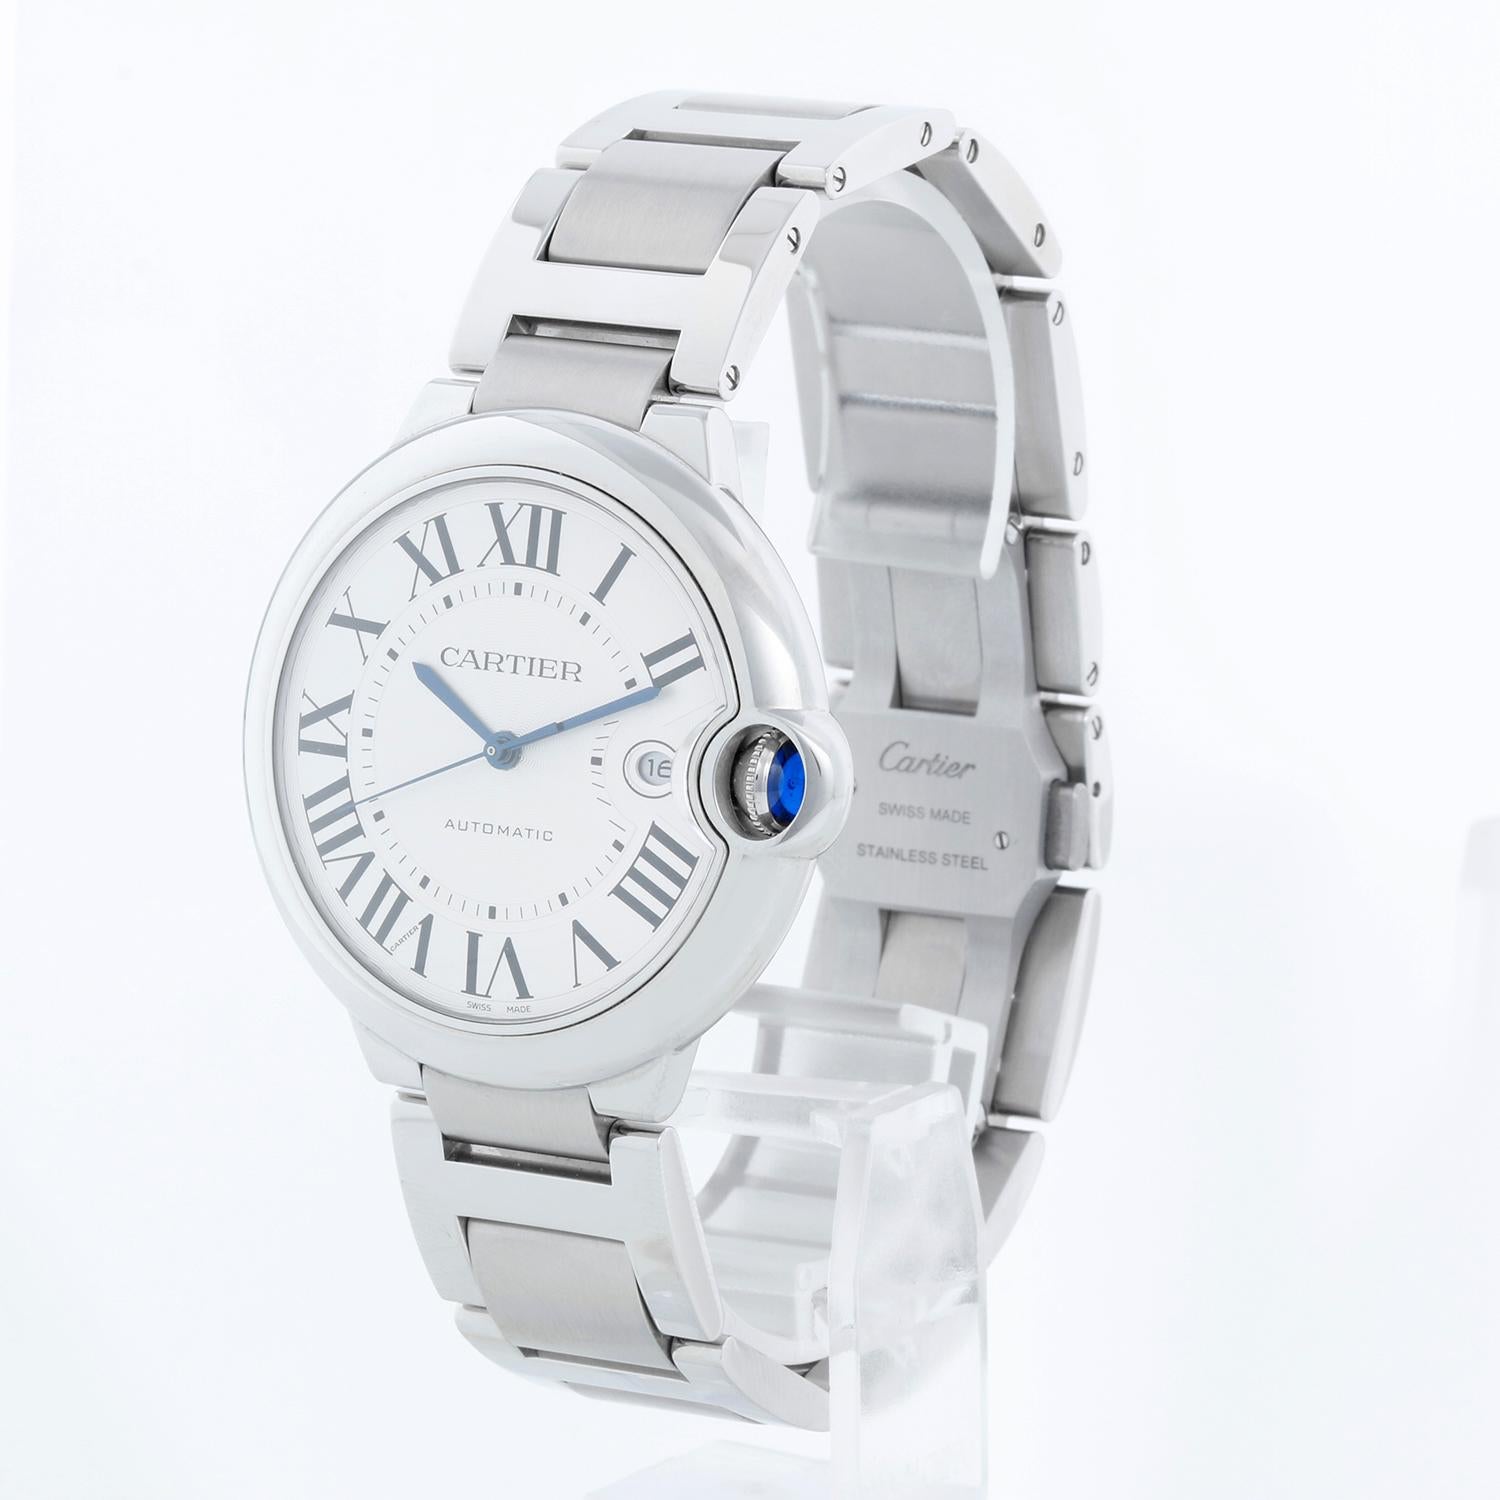 Cartier Ballon Bleu Men's 42mm Stainless Steel Automatic W69012Z4 3765 In Excellent Condition For Sale In Dallas, TX